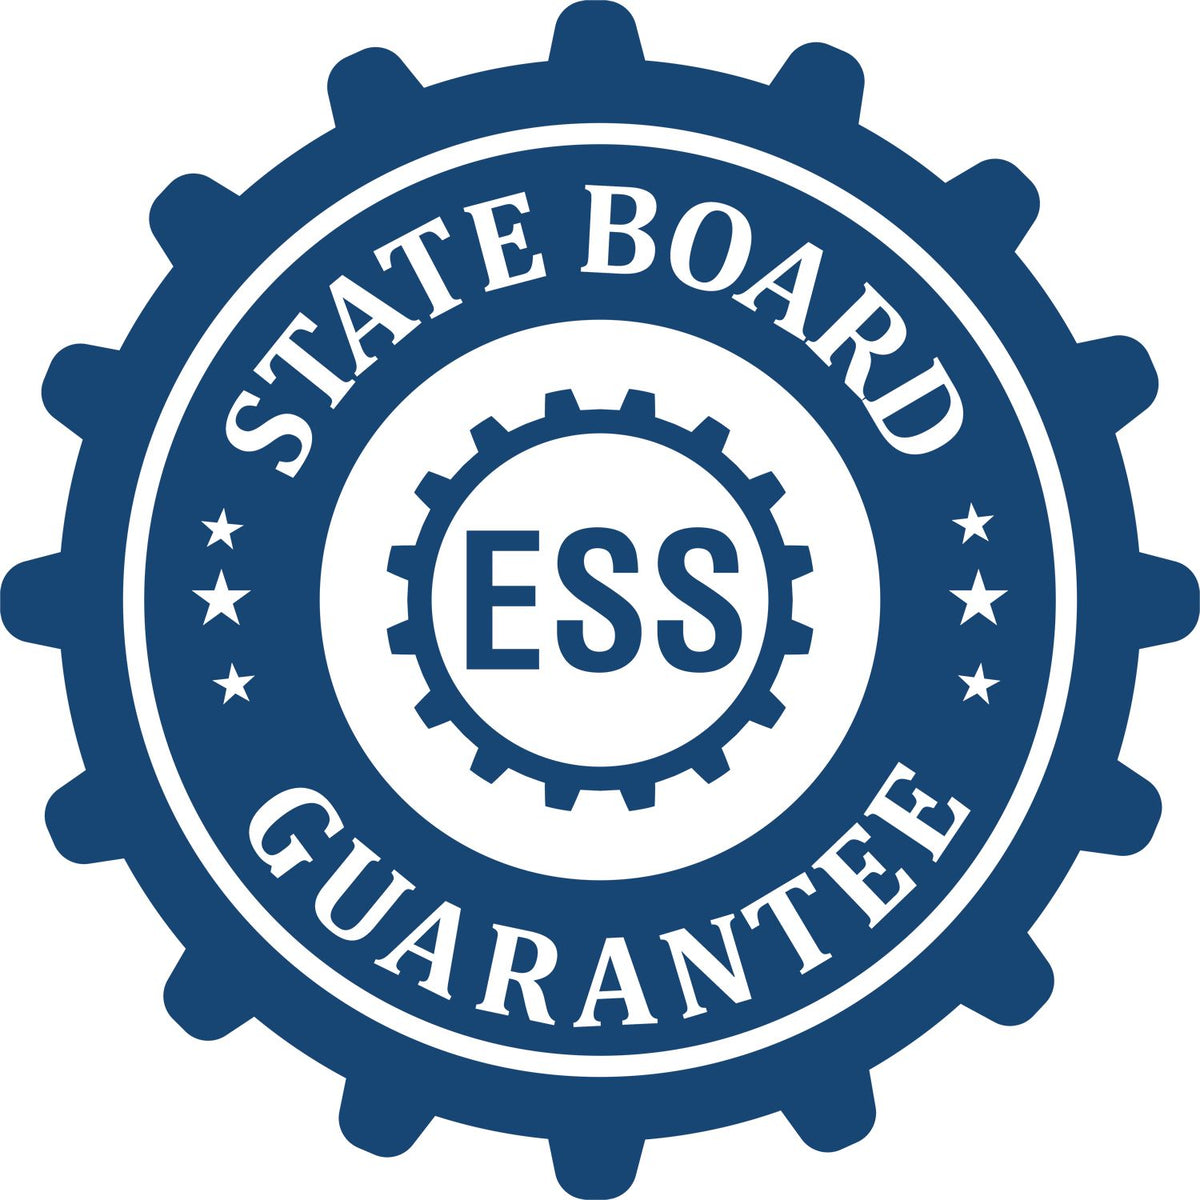 An emblem in a gear shape illustrating a state board guarantee for the South Dakota Landscape Architectural Seal Stamp product.